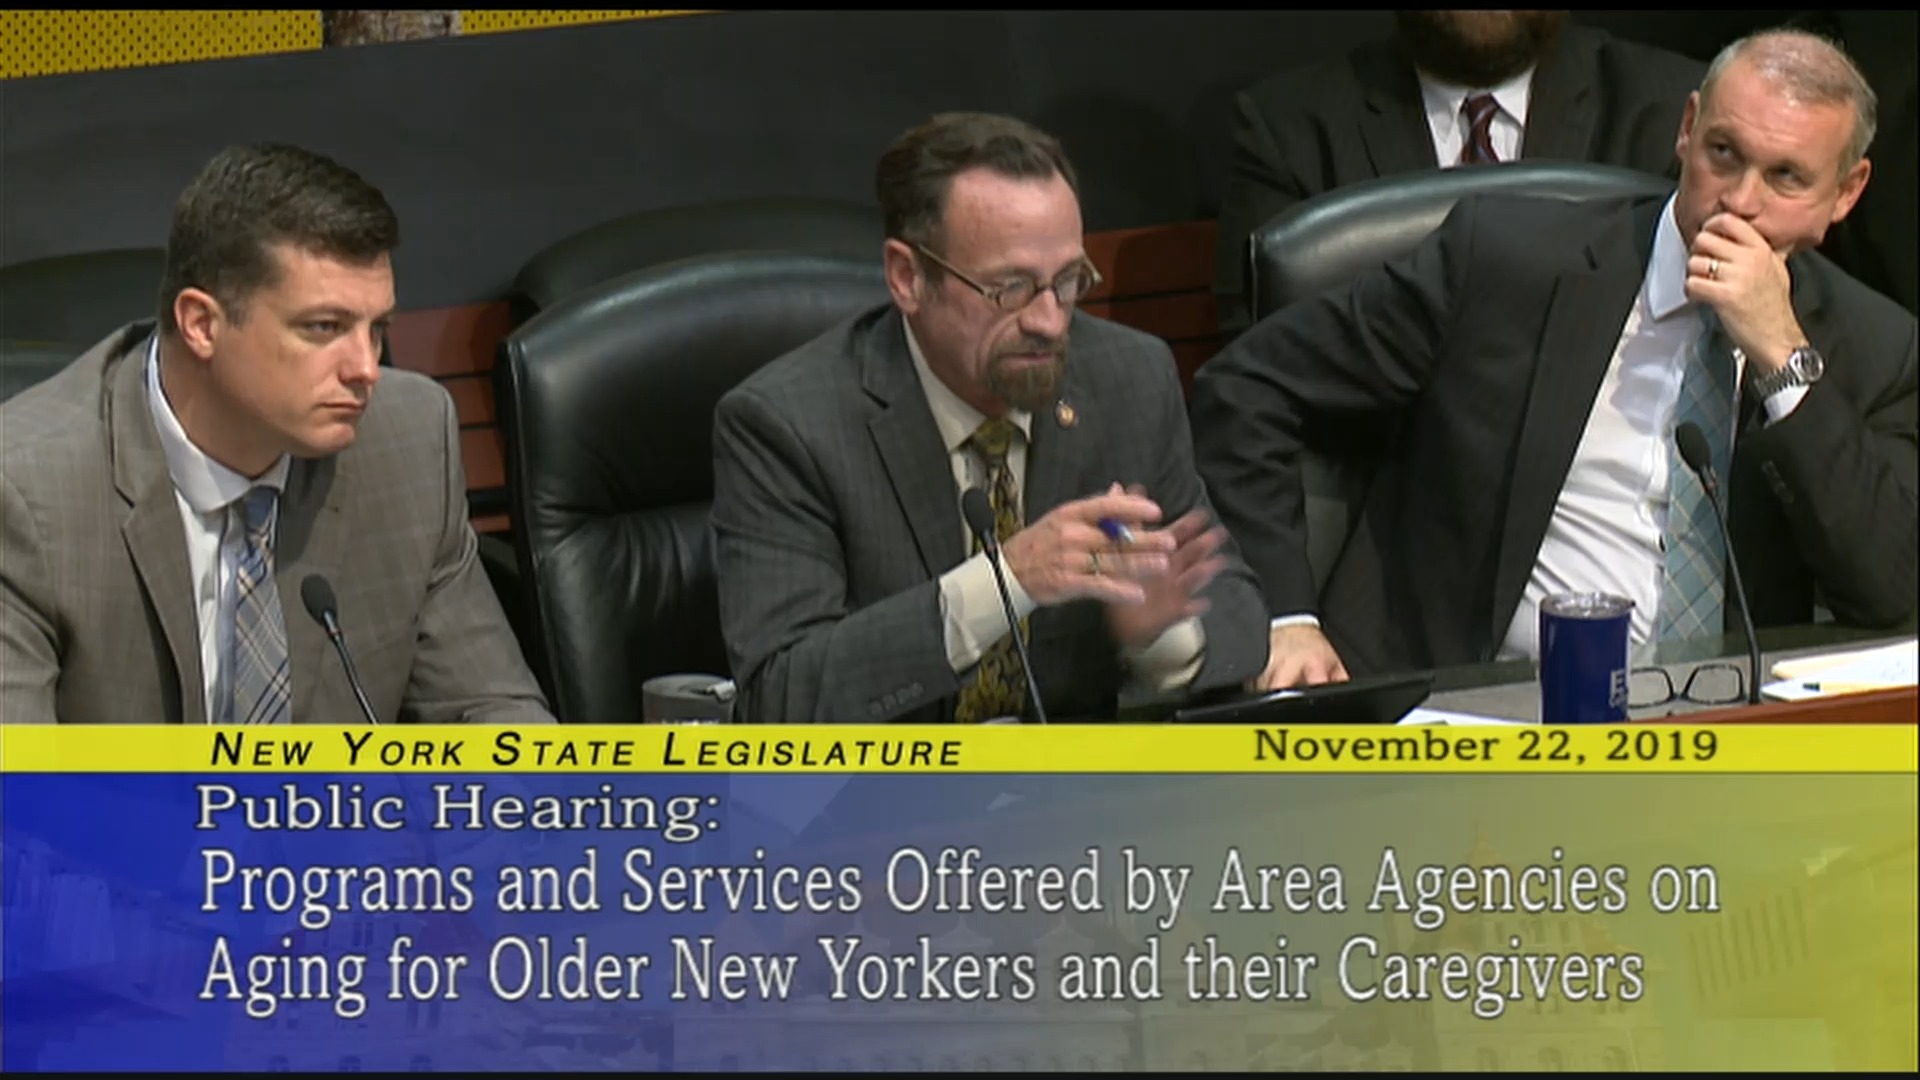 Public Hearing On Programs And Services For Aging New Yorkers (3)